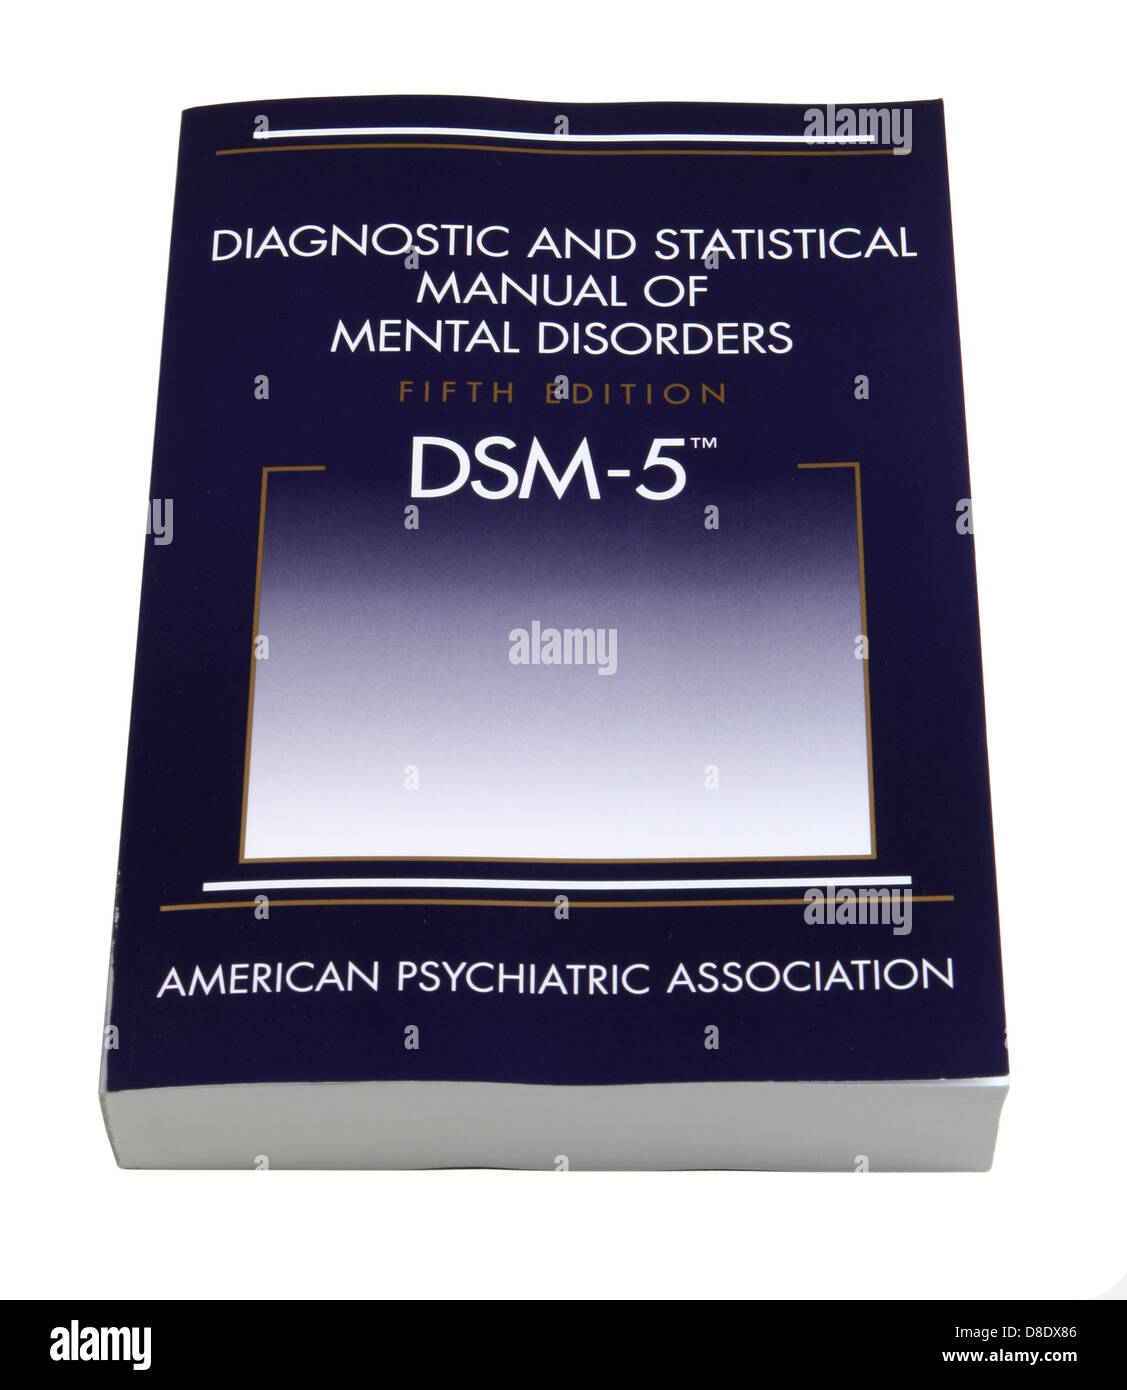 Diagnostic and Statistical Manual of Mental Disorders, Fifth Edition (DSM-5) published by the American Psychiatric Association Stock Photo